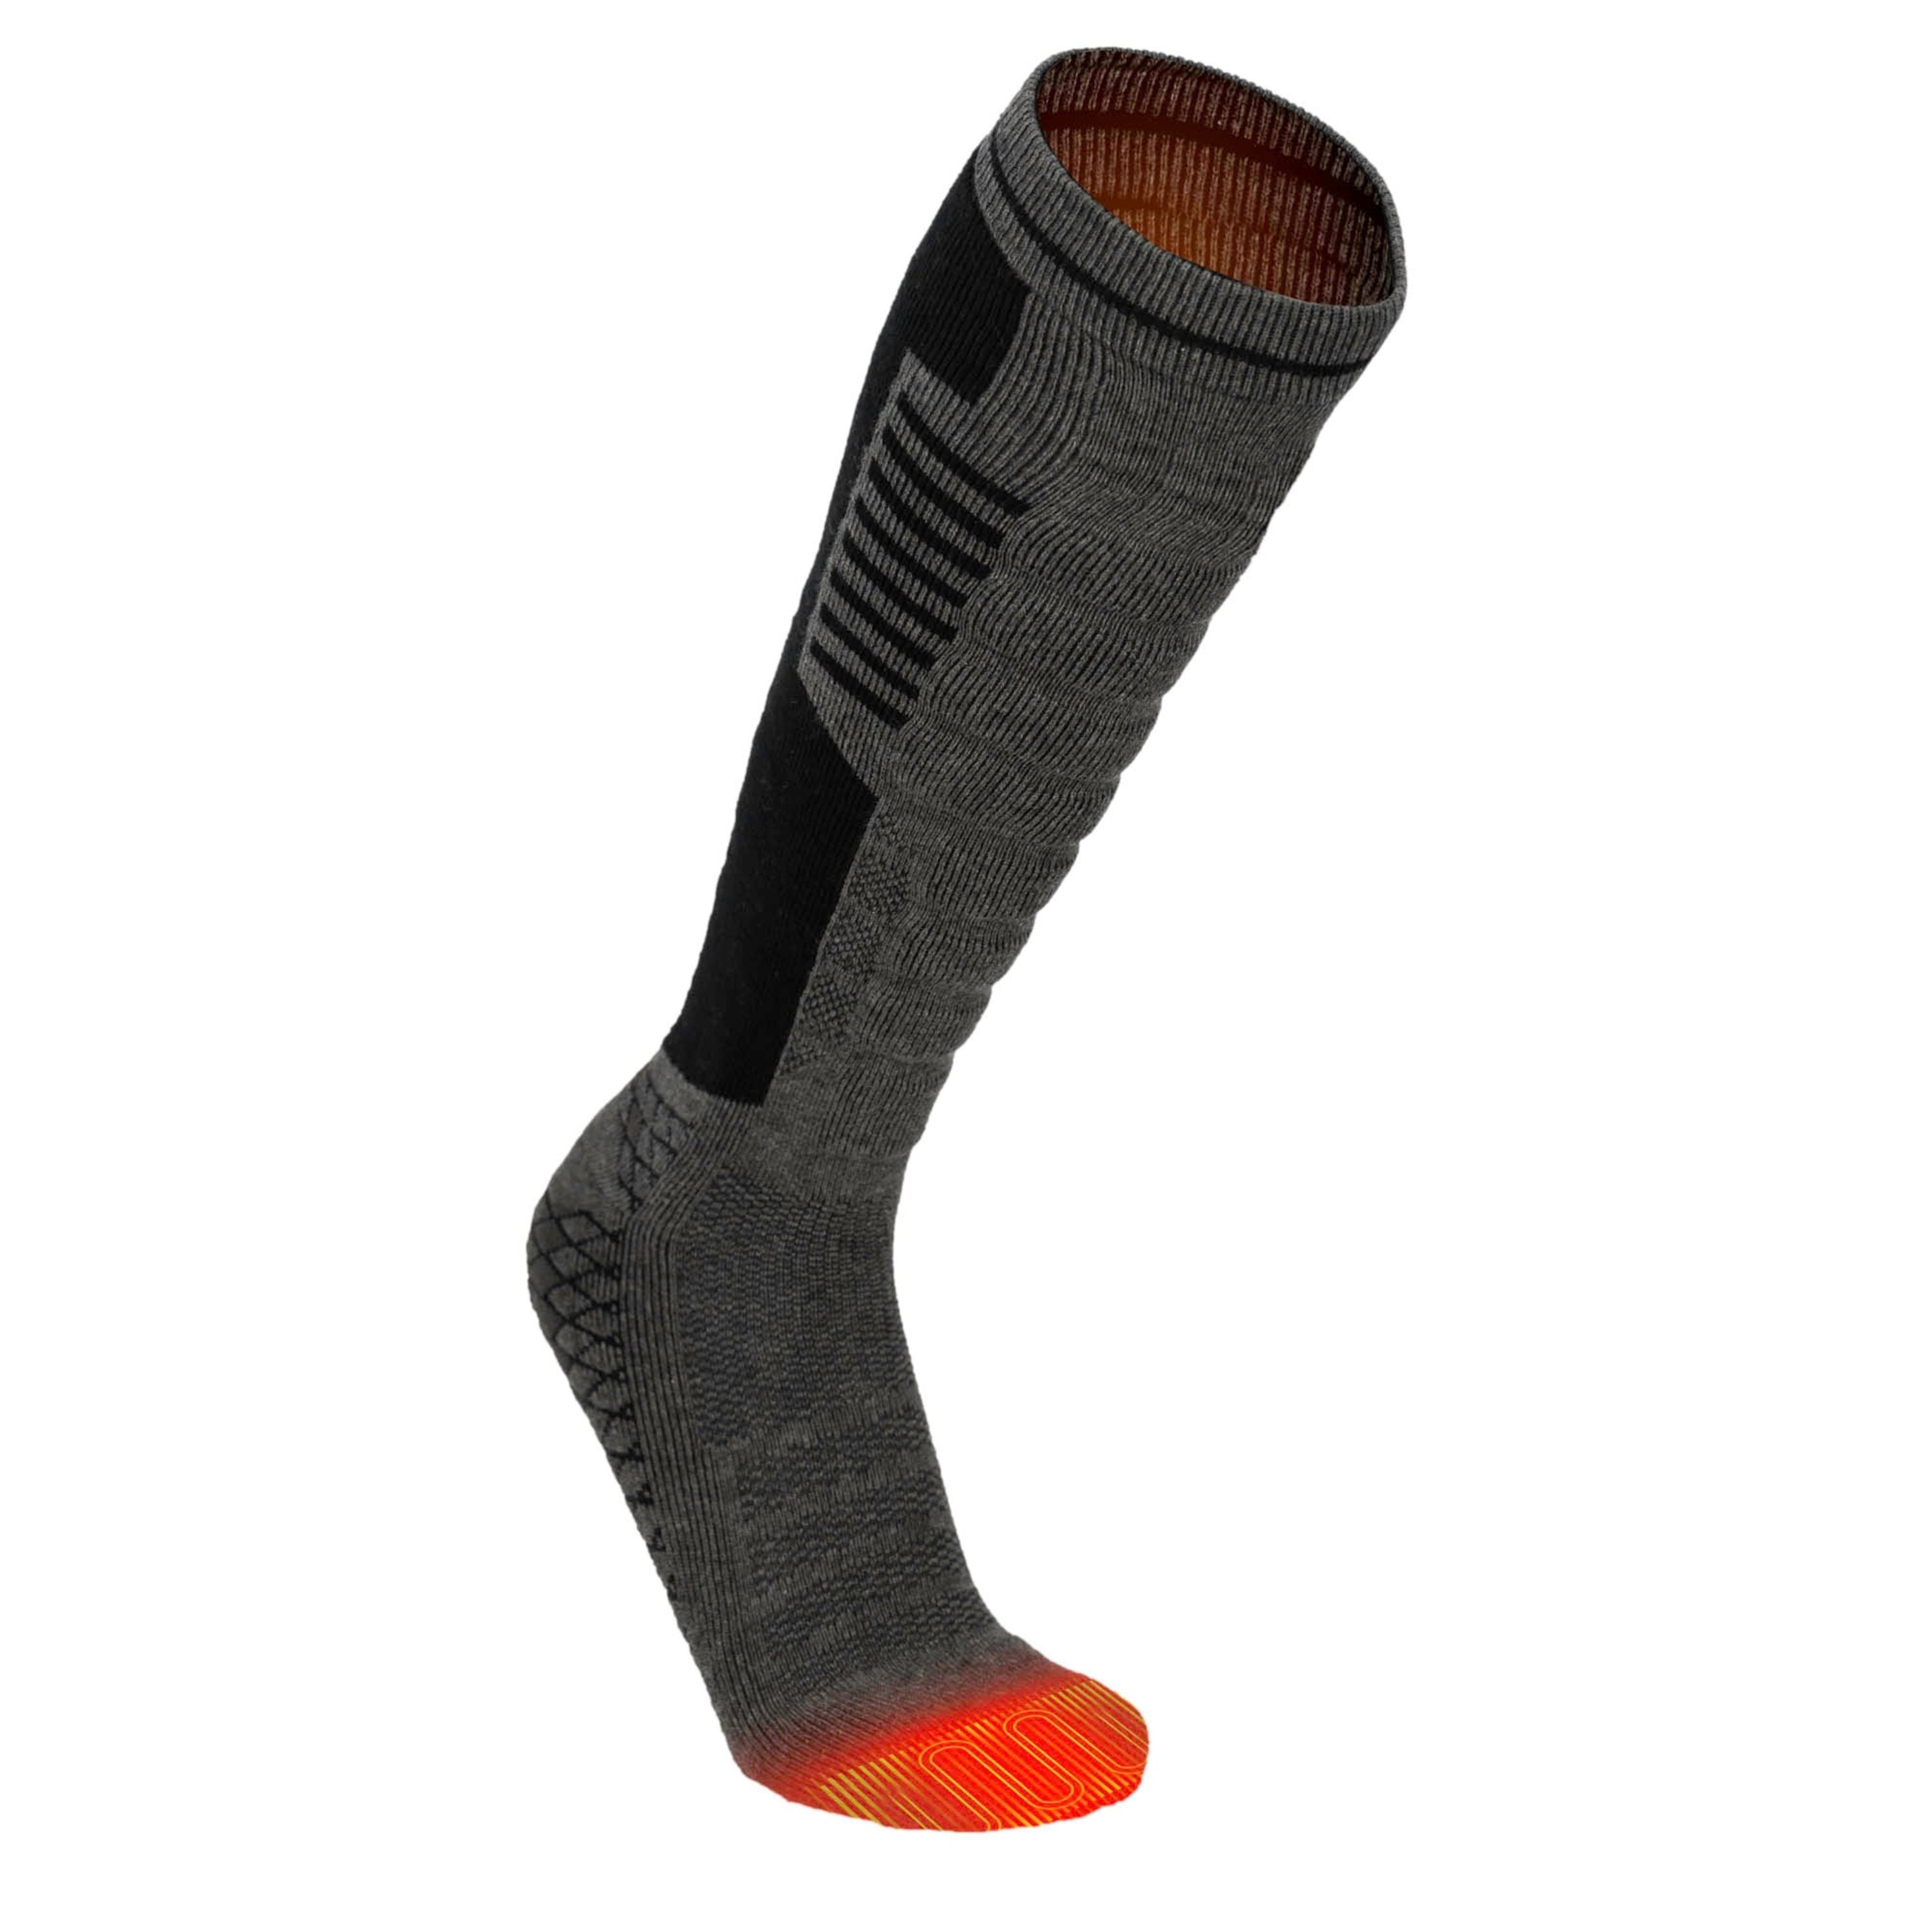 Chaussettes thermales chauffantes - Unisexe